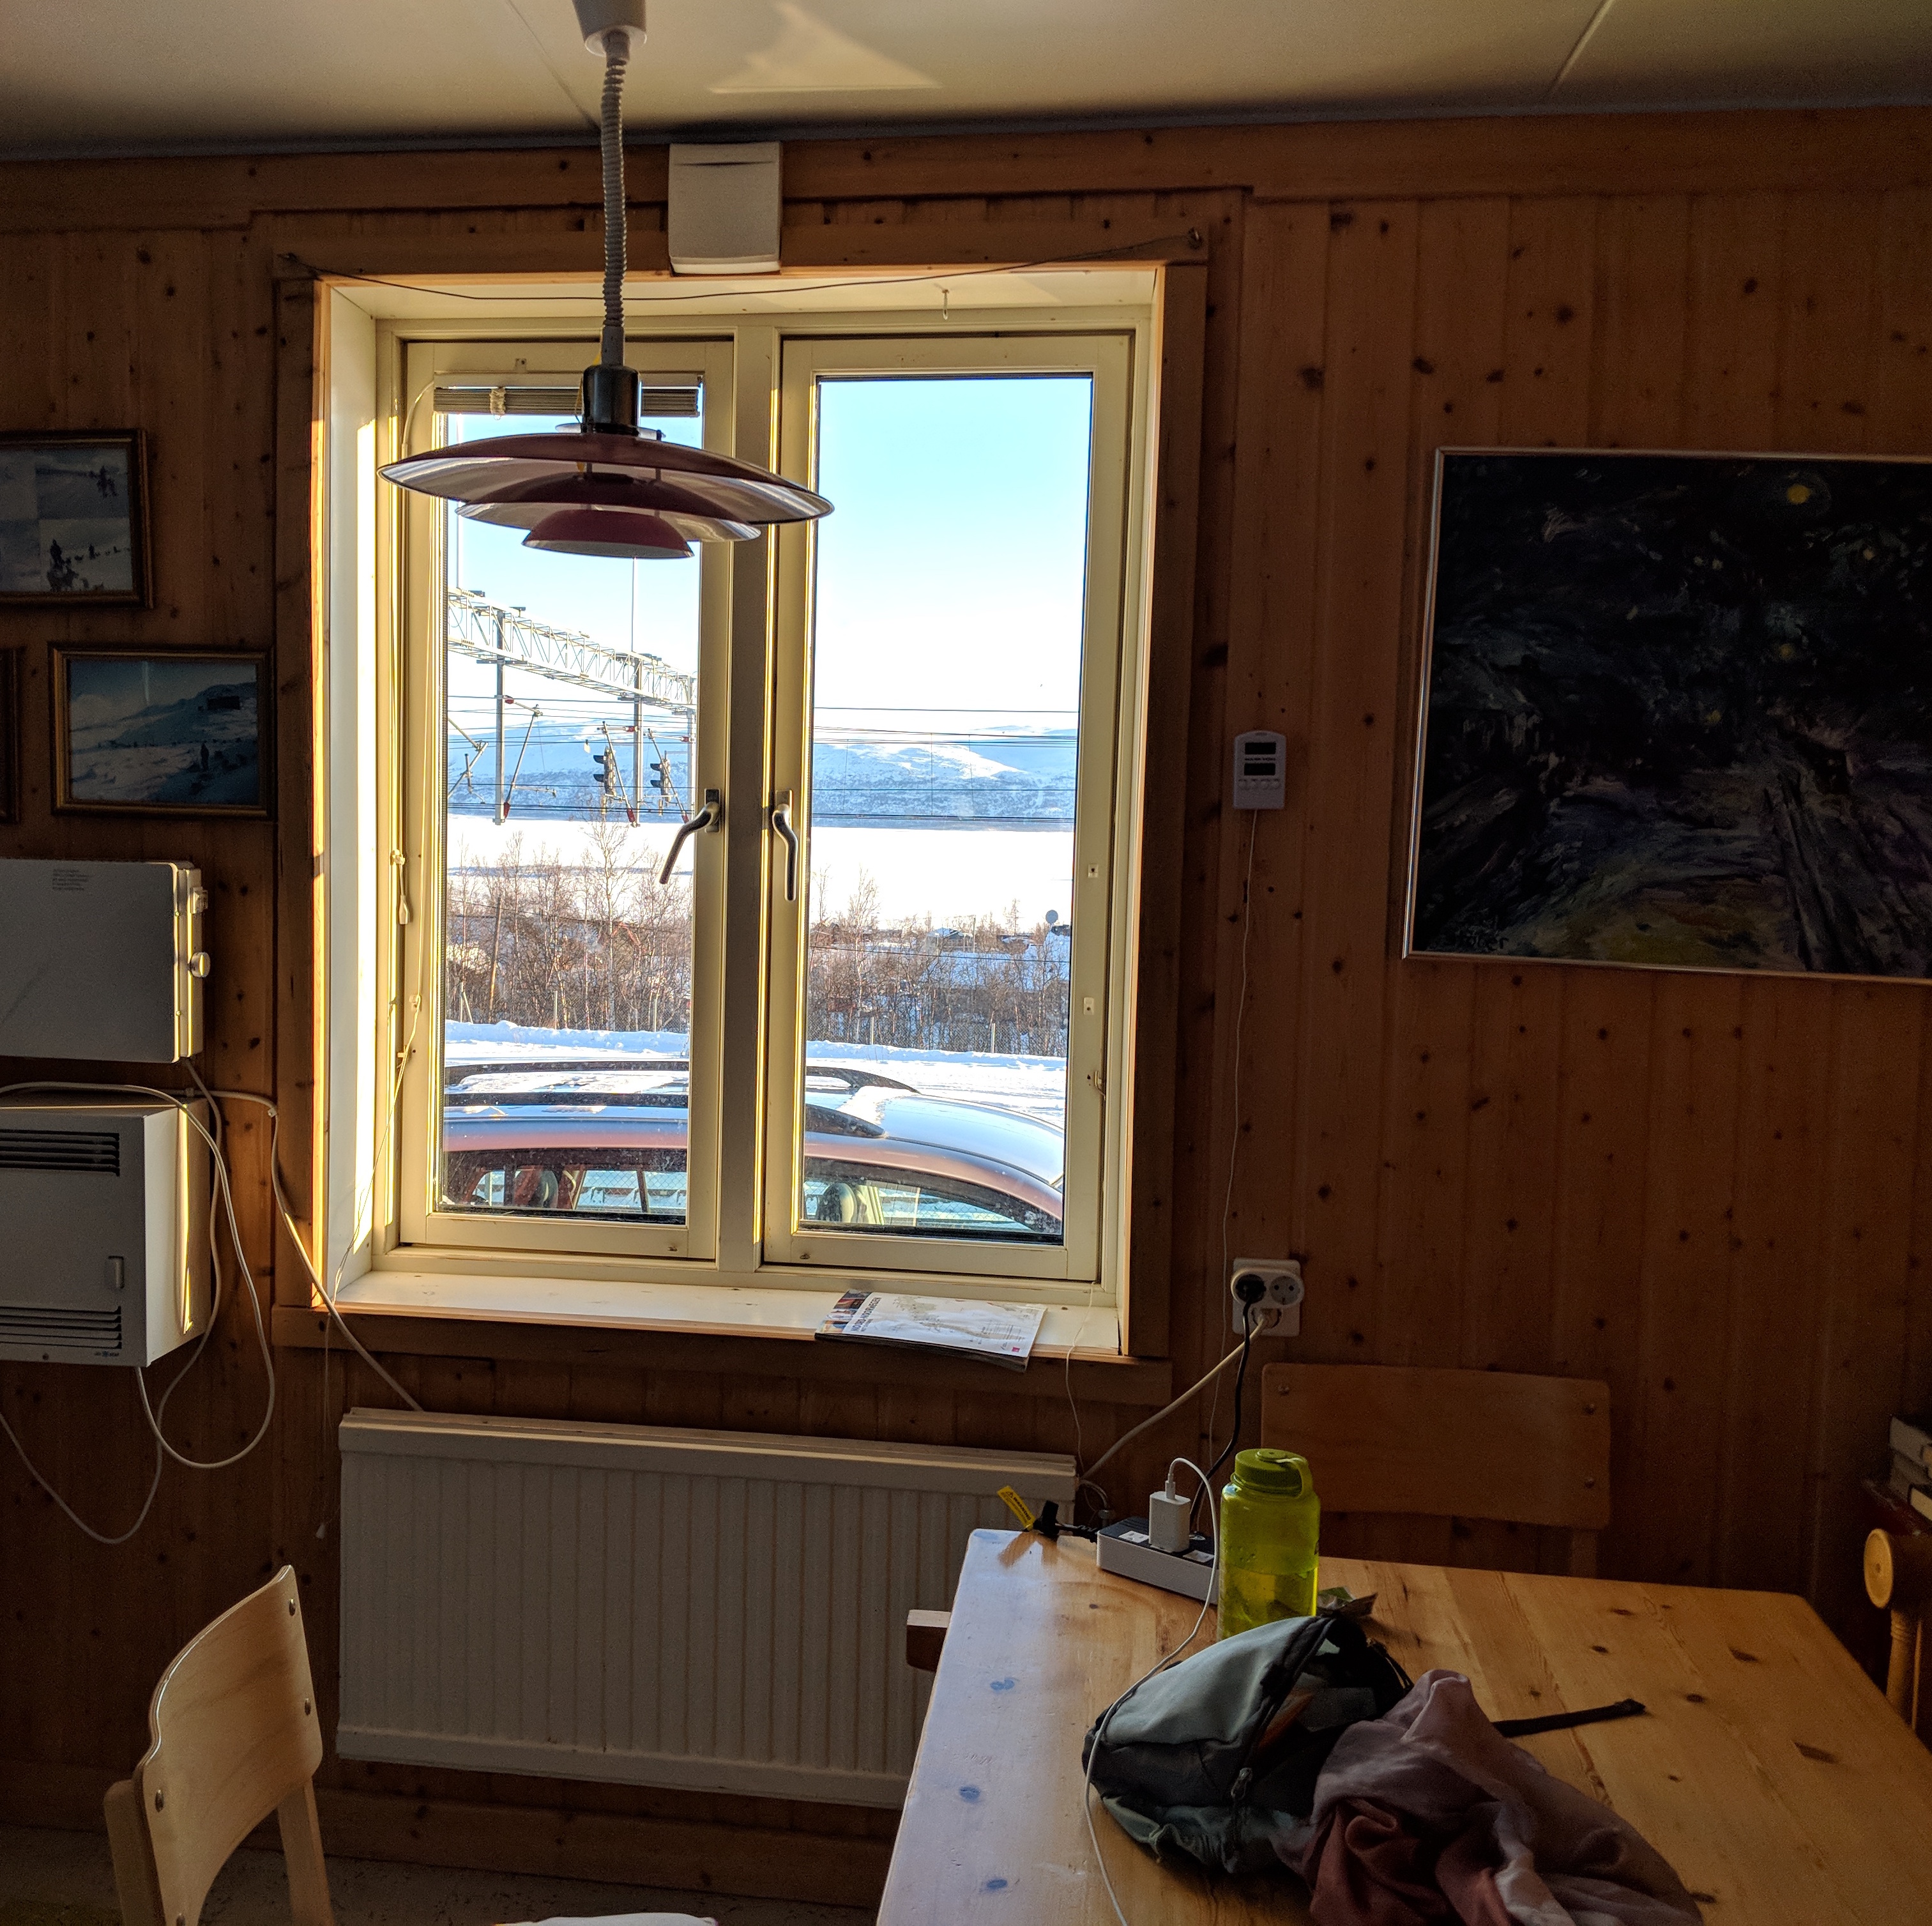 Abisko.net kitchen, looking out over the train tracks and the lake.